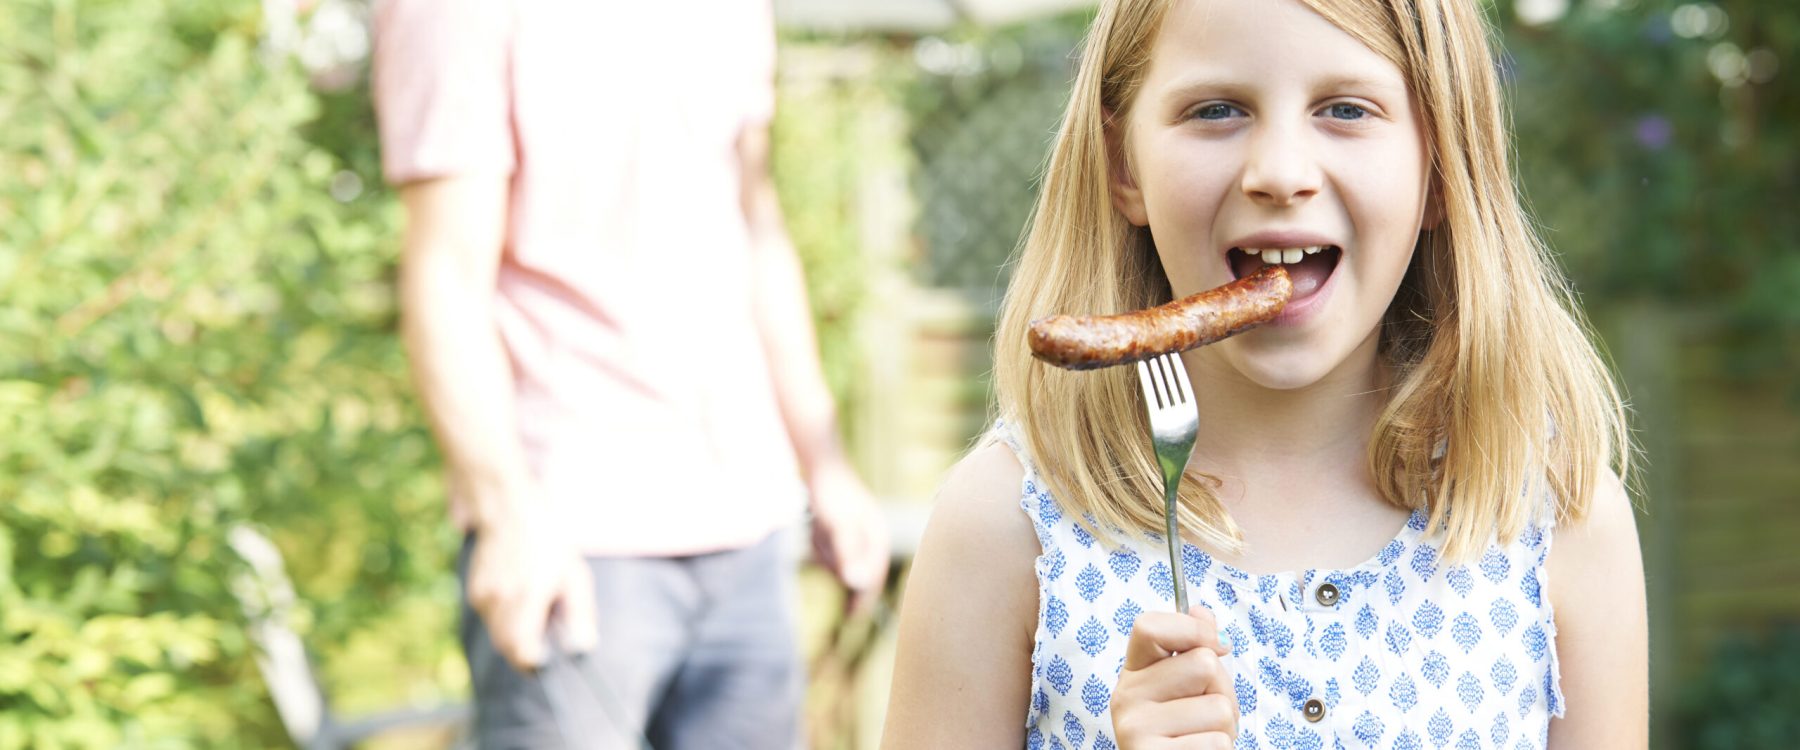 Girl Eating Sausage At Family Barbeque